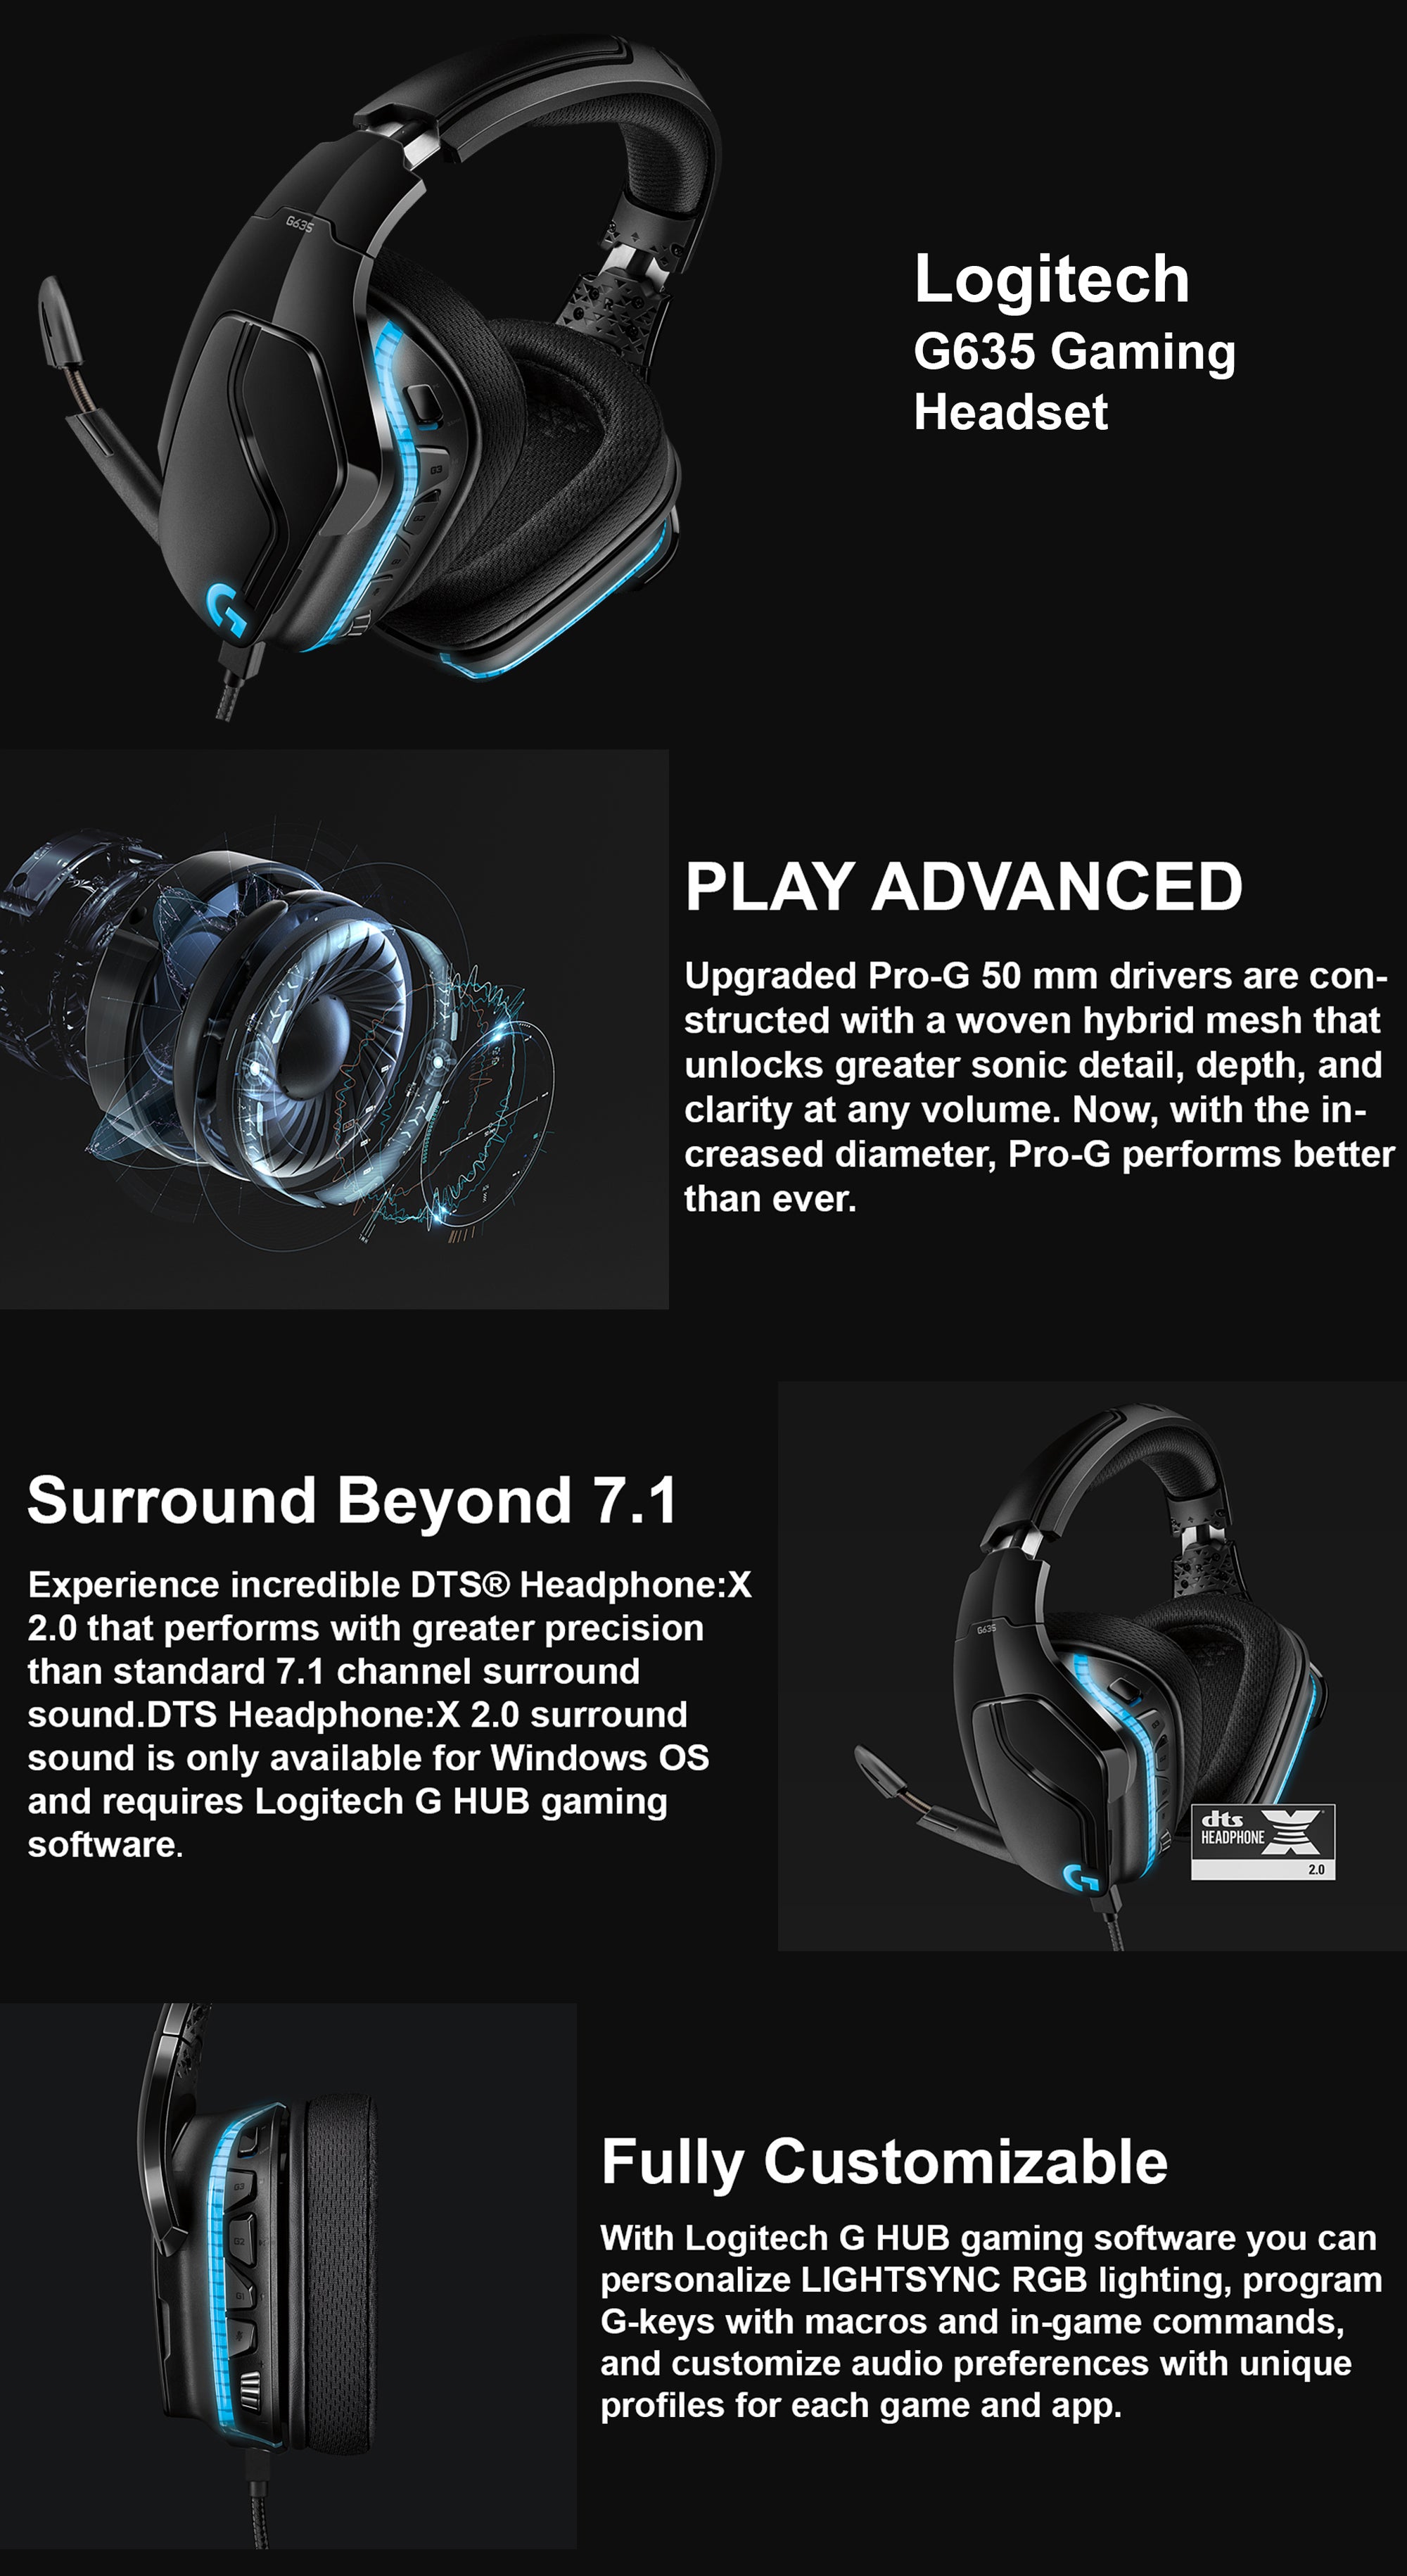 Logitech G635 Wired Gaming RGB Headset, 7.1 Surround Sound, DTS Headphone:X  2.0, 50 mm Pro-G Drivers, USB And 3.5mm Audio Jack, Flip-to-Mute Mic, PC/Mac/Xbox  One/PS4/Nintendo Switch Egypt Cairo, Giza